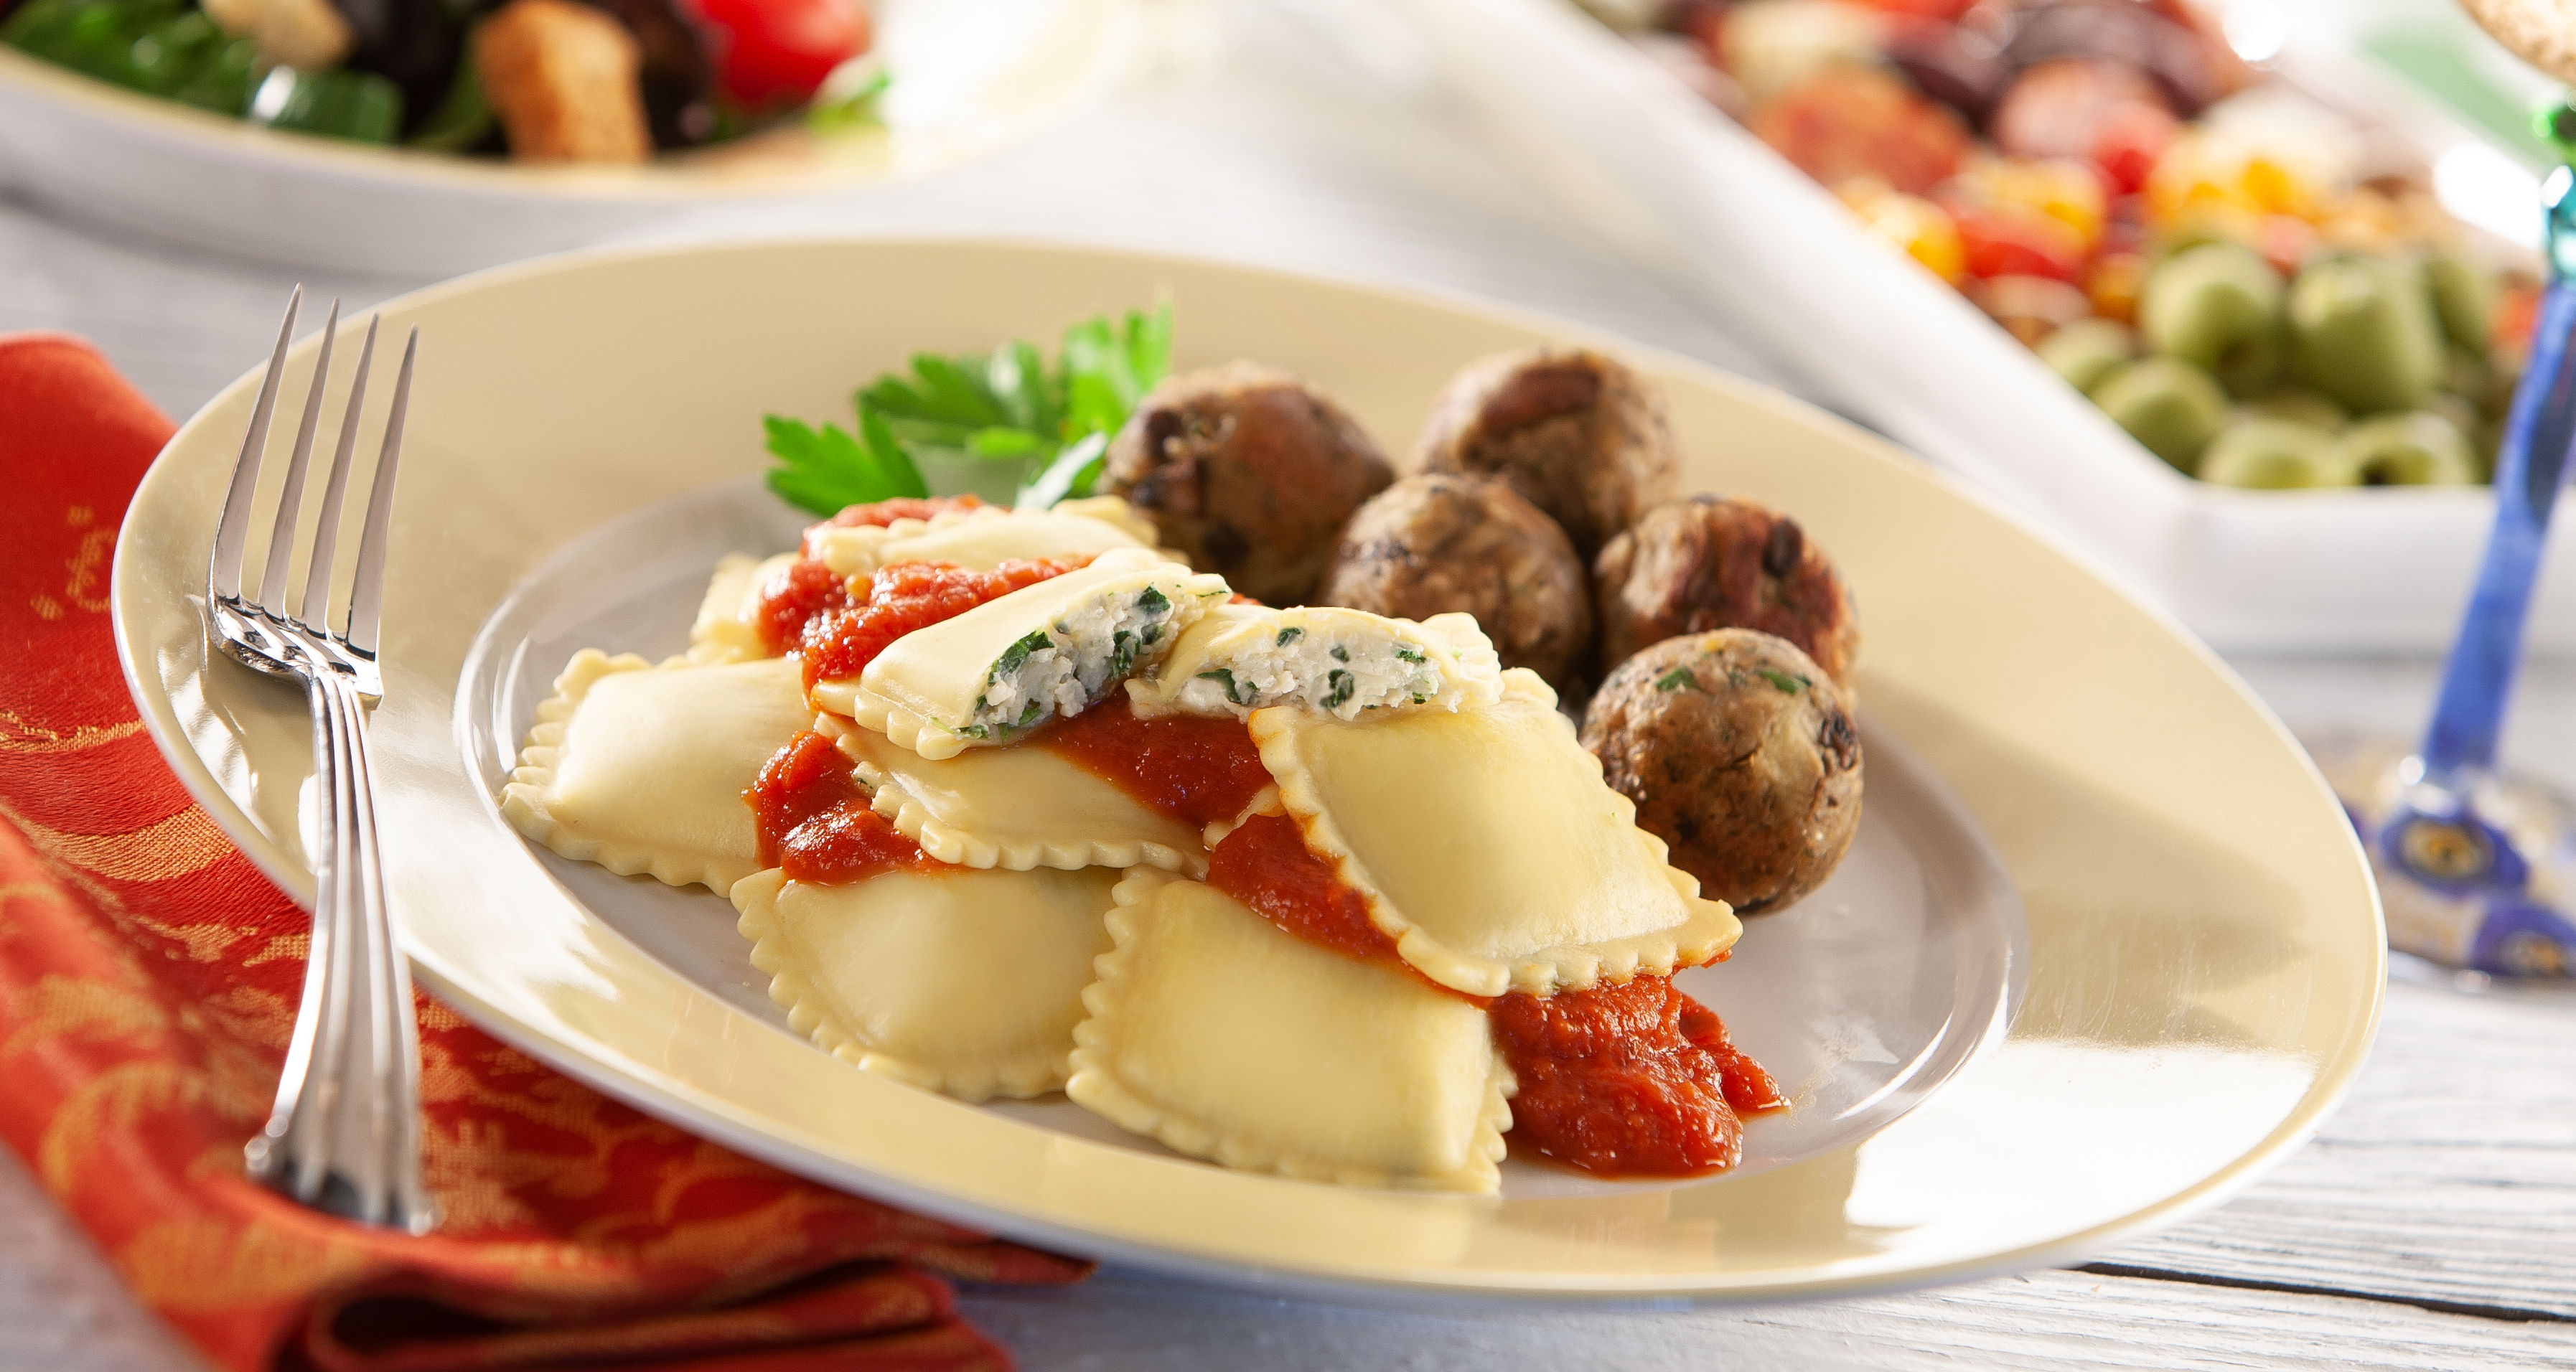 Spinach and Cheese Ravioli with Meatless Meatballs and Pomodoro Sauce